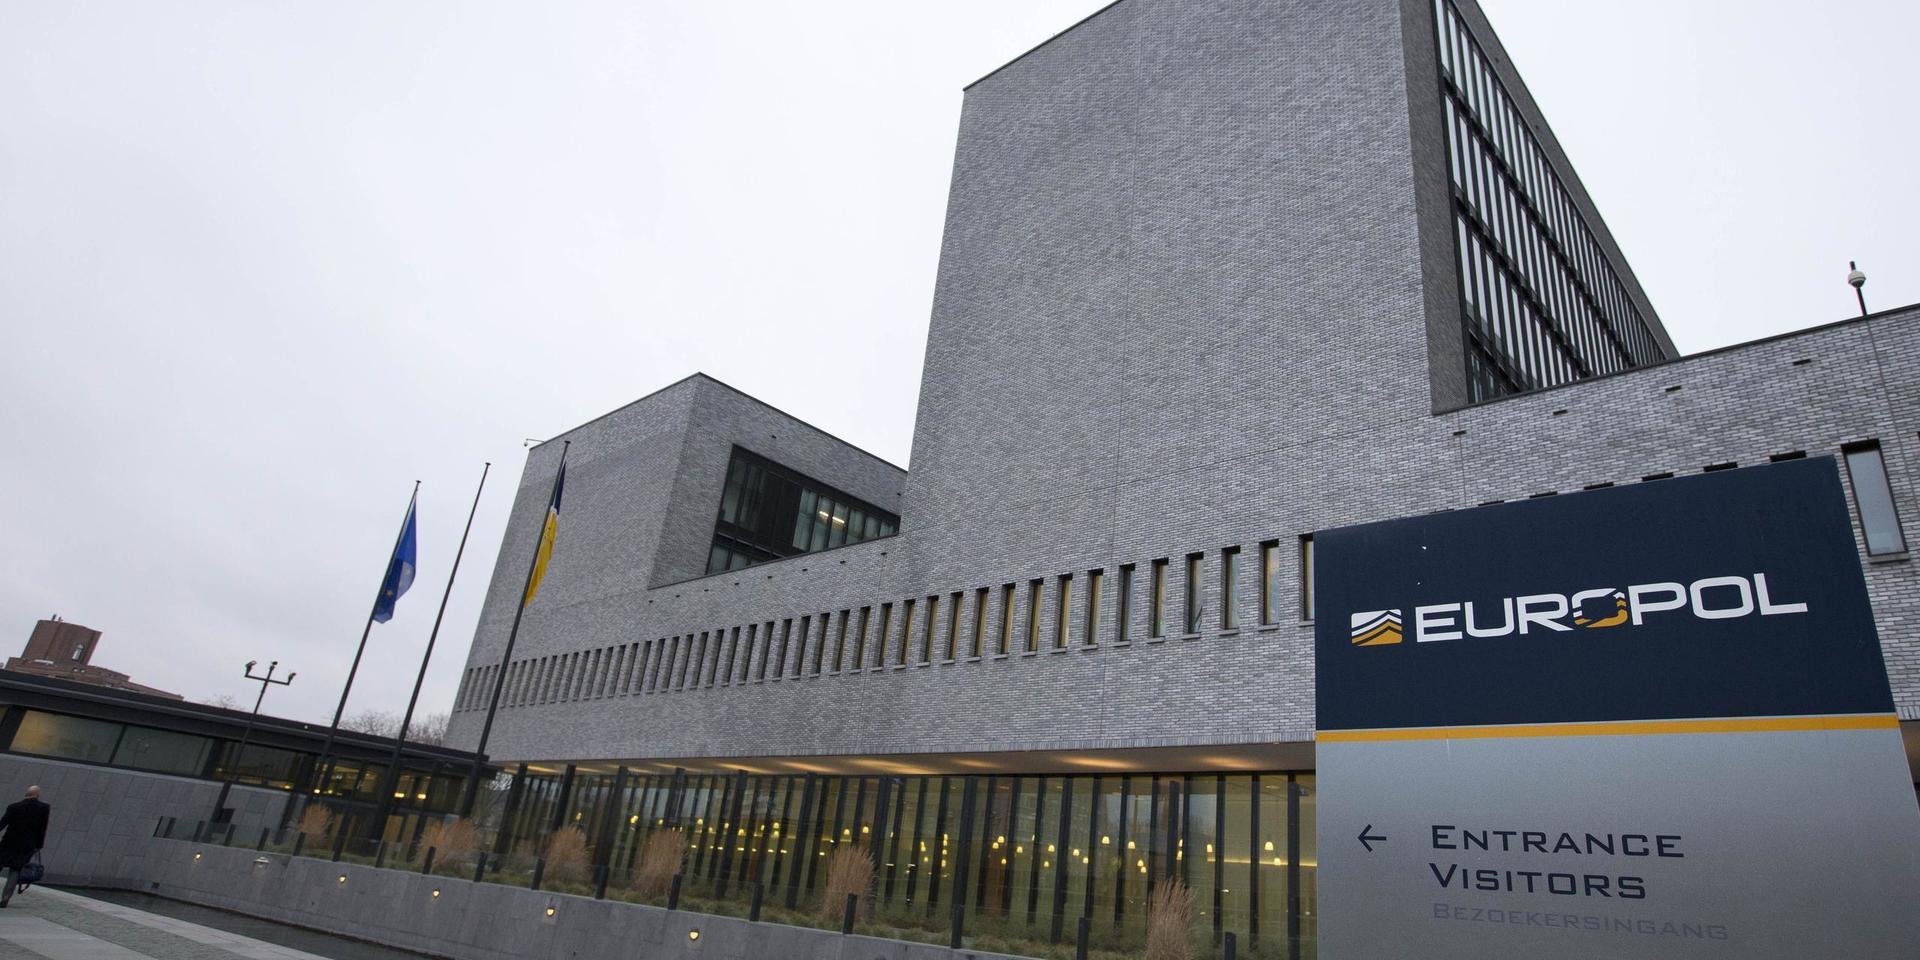 Exterior view of the Europol headquarters where participants gathered to attend the anti terror conference in The Hague, Netherlands, Monday, Jan. 11, 2016. (AP Photo/Peter Dejong)